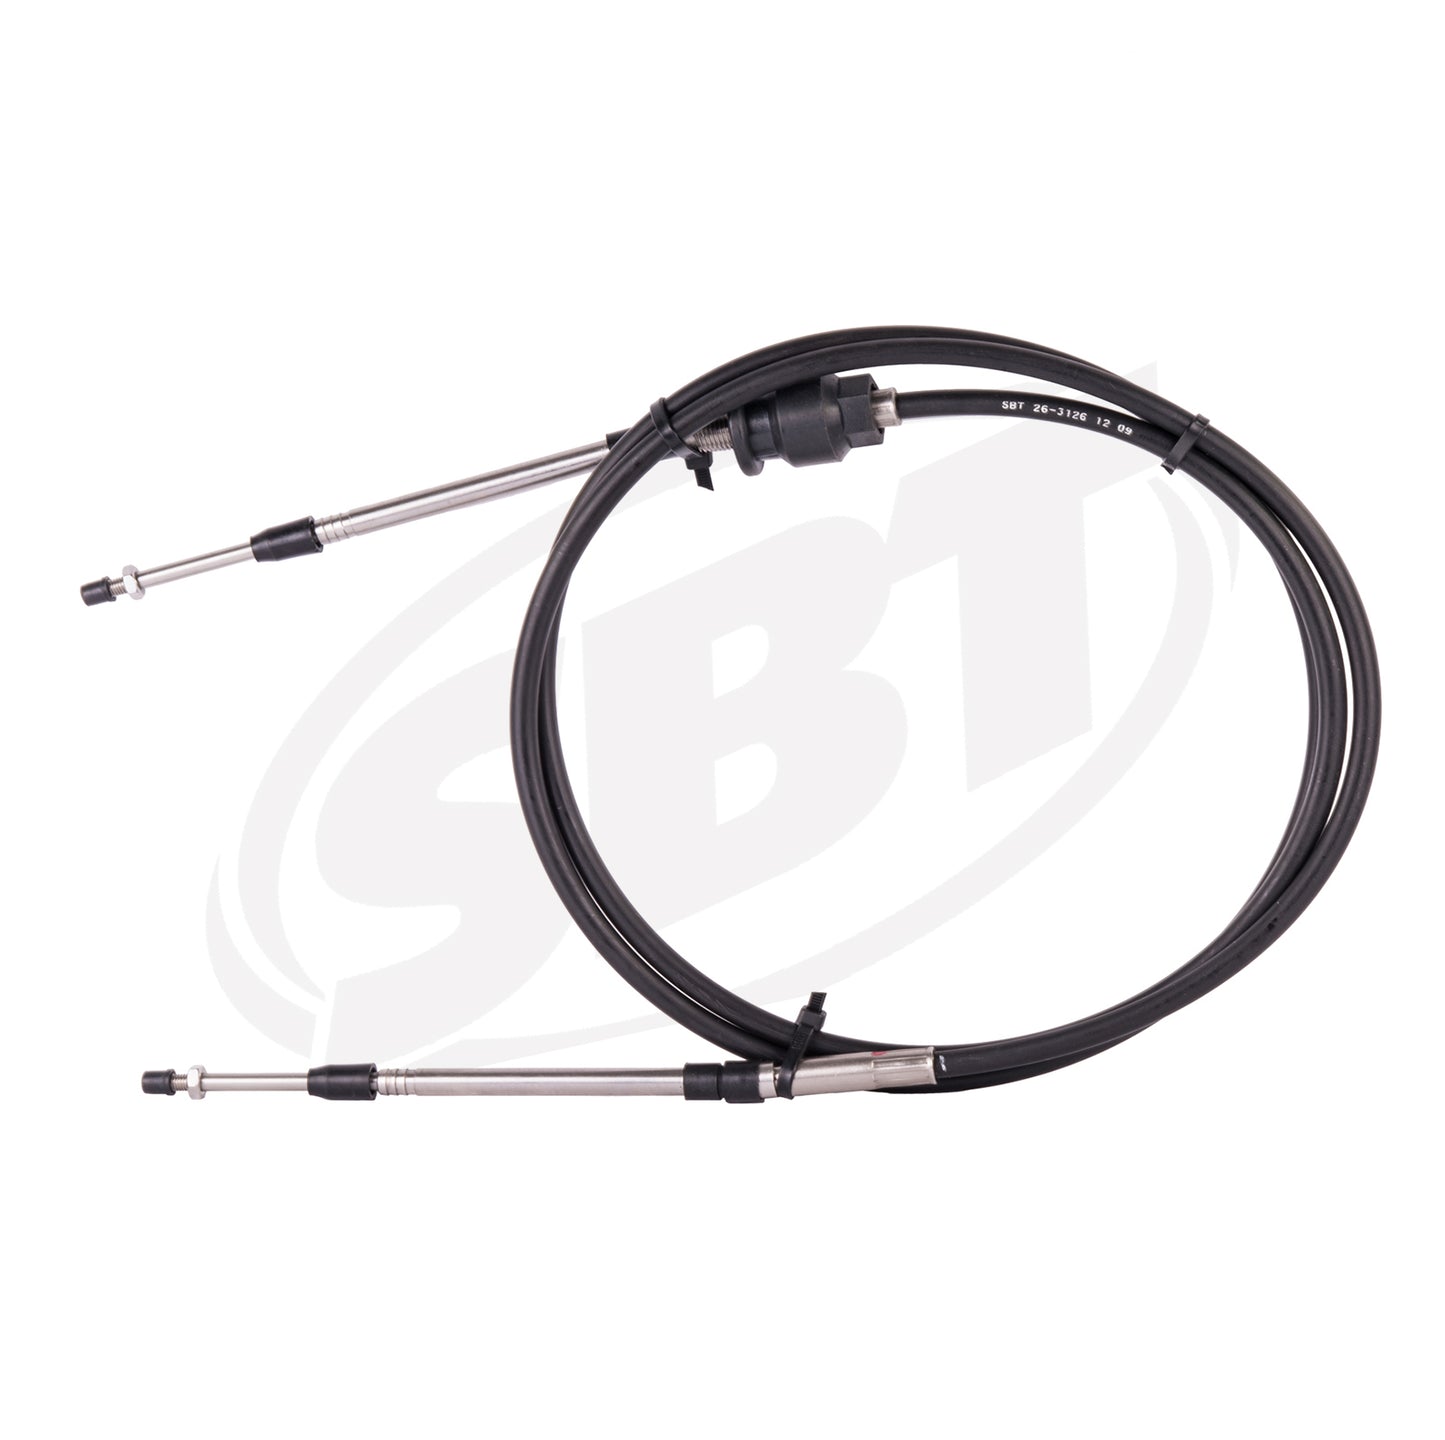 SBT Sea-Doo Steering Cable RXT X 255 277001555 2008